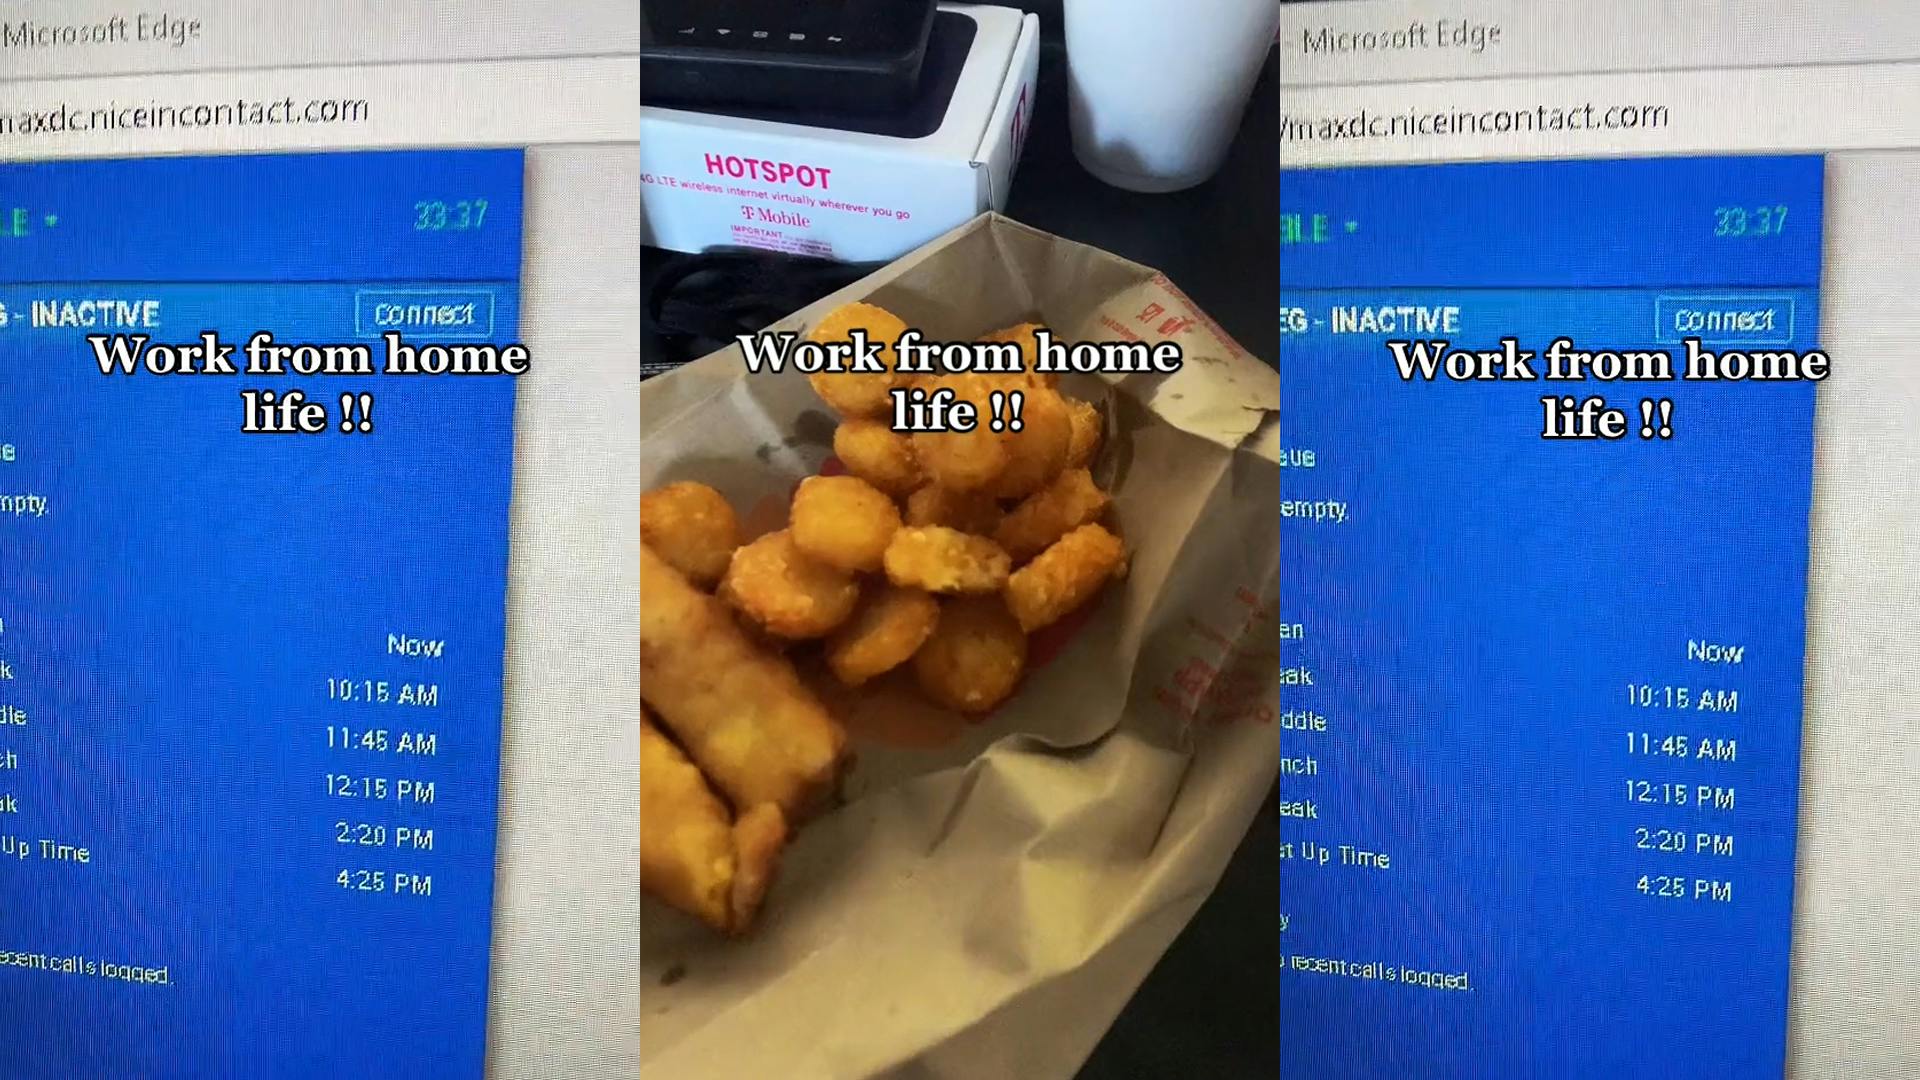 computer screen " Now 10:15 AM 11:45 AM 12:15 PM 2:20 PM 4:25 PM" caption "Work from home life!!" (l) fast food sitting on bag on desk caption "Work from home life!!" (c) computer screen " Now 10:15 AM 11:45 AM 12:15 PM 2:20 PM 4:25 PM" caption "Work from home life!!" (r)